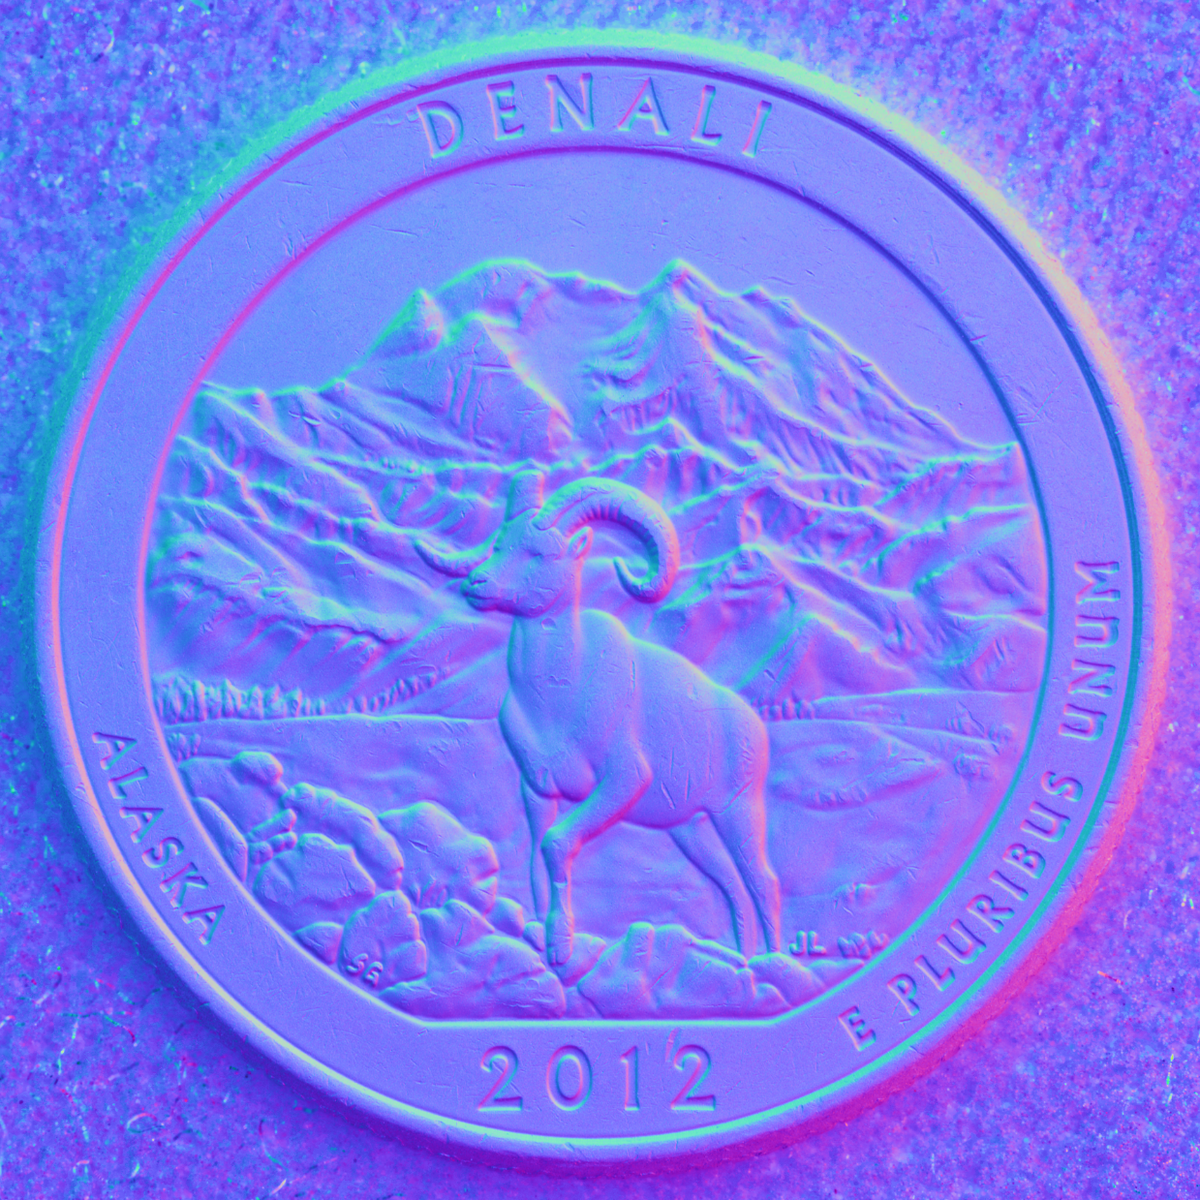 RTI-produced normal map of a quarter.